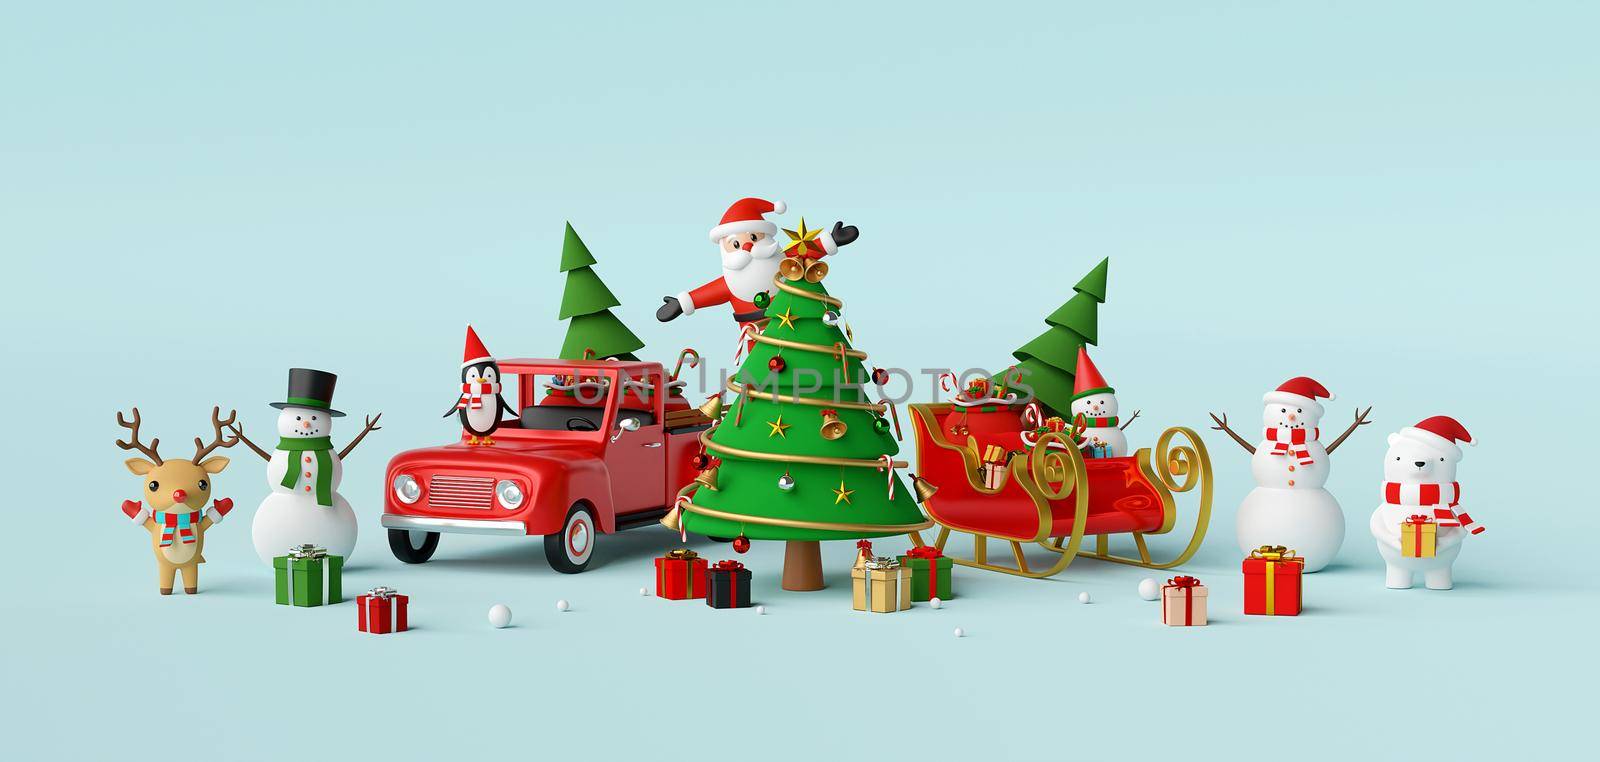 Merry Christmas and Happy New Year, Scene of Christmas celebration with Santa Claus and friends, 3d rendering by nutzchotwarut